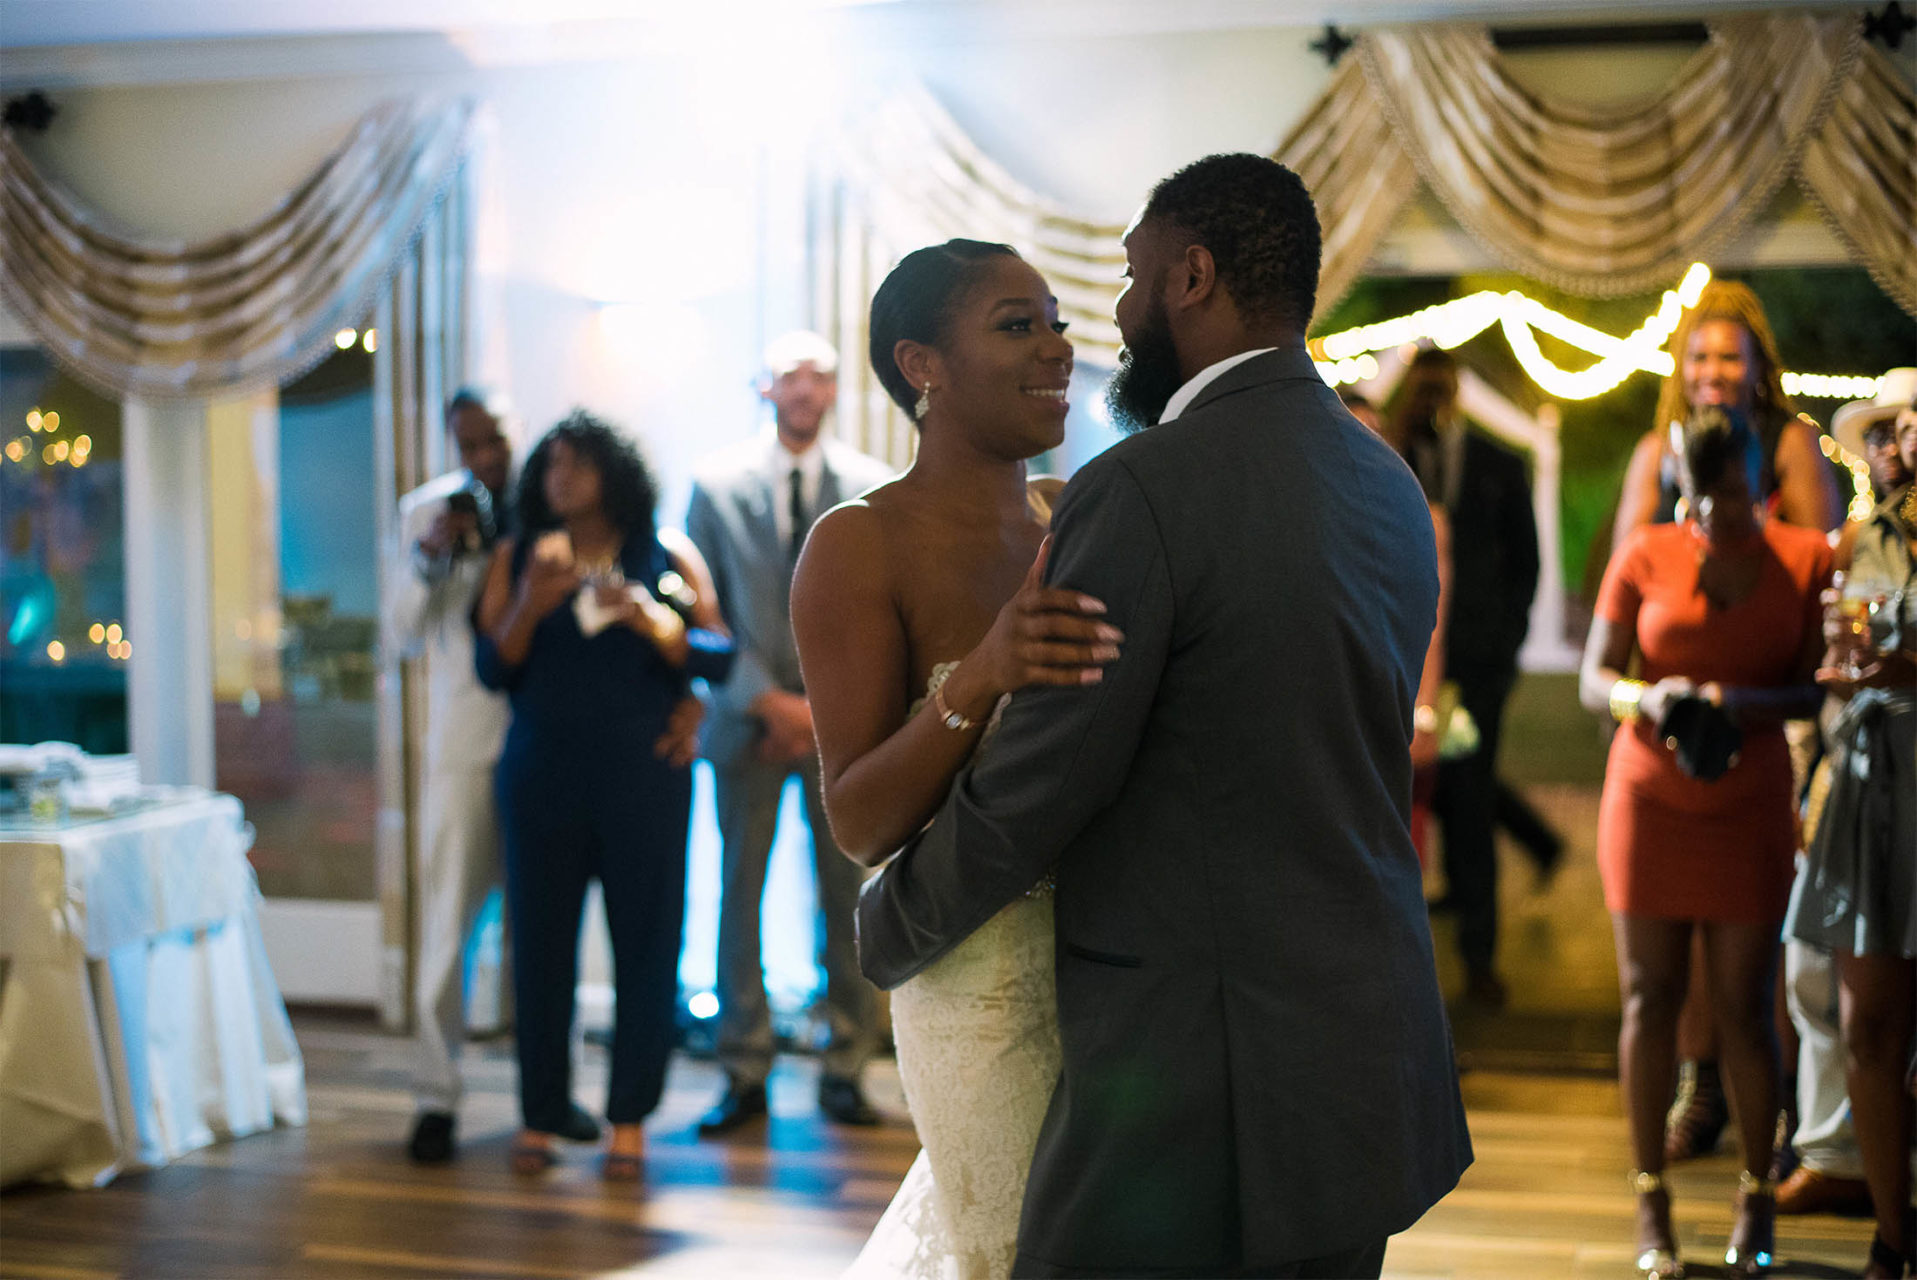 65 Best First Dance Songs That You'll Adore A Practical Wedding